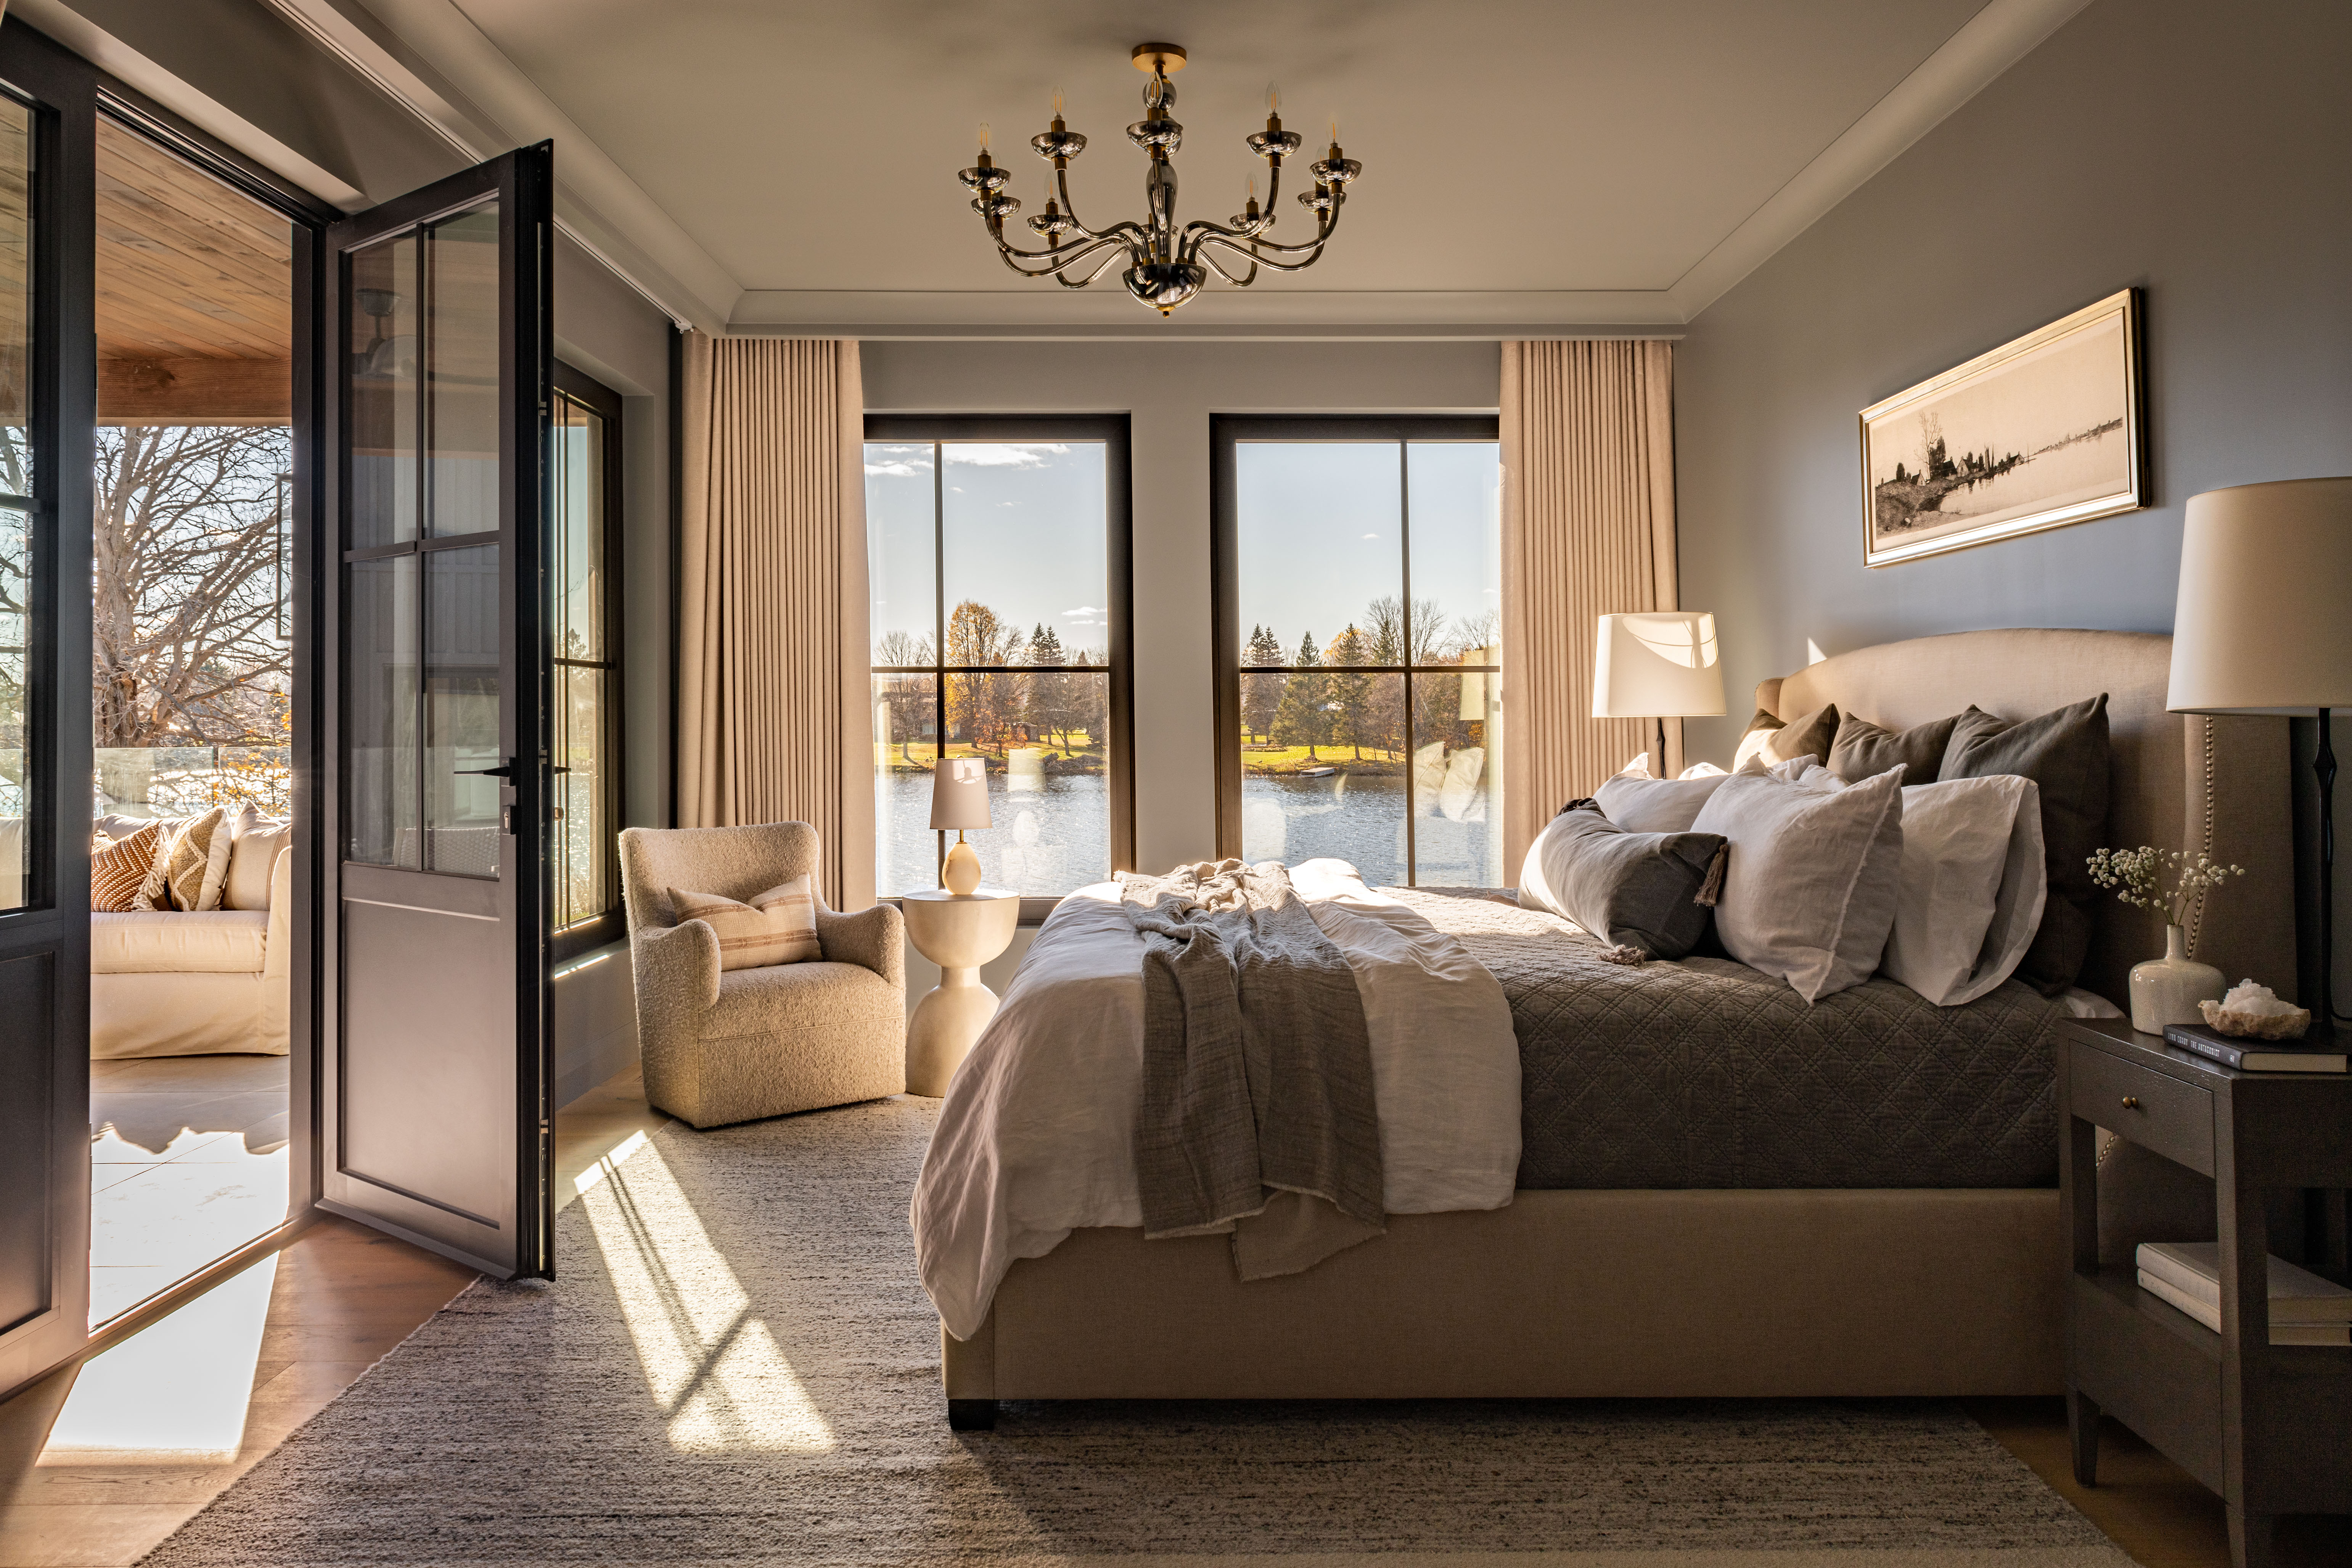 A riverside bedroom in neutral tones filled with natural light.